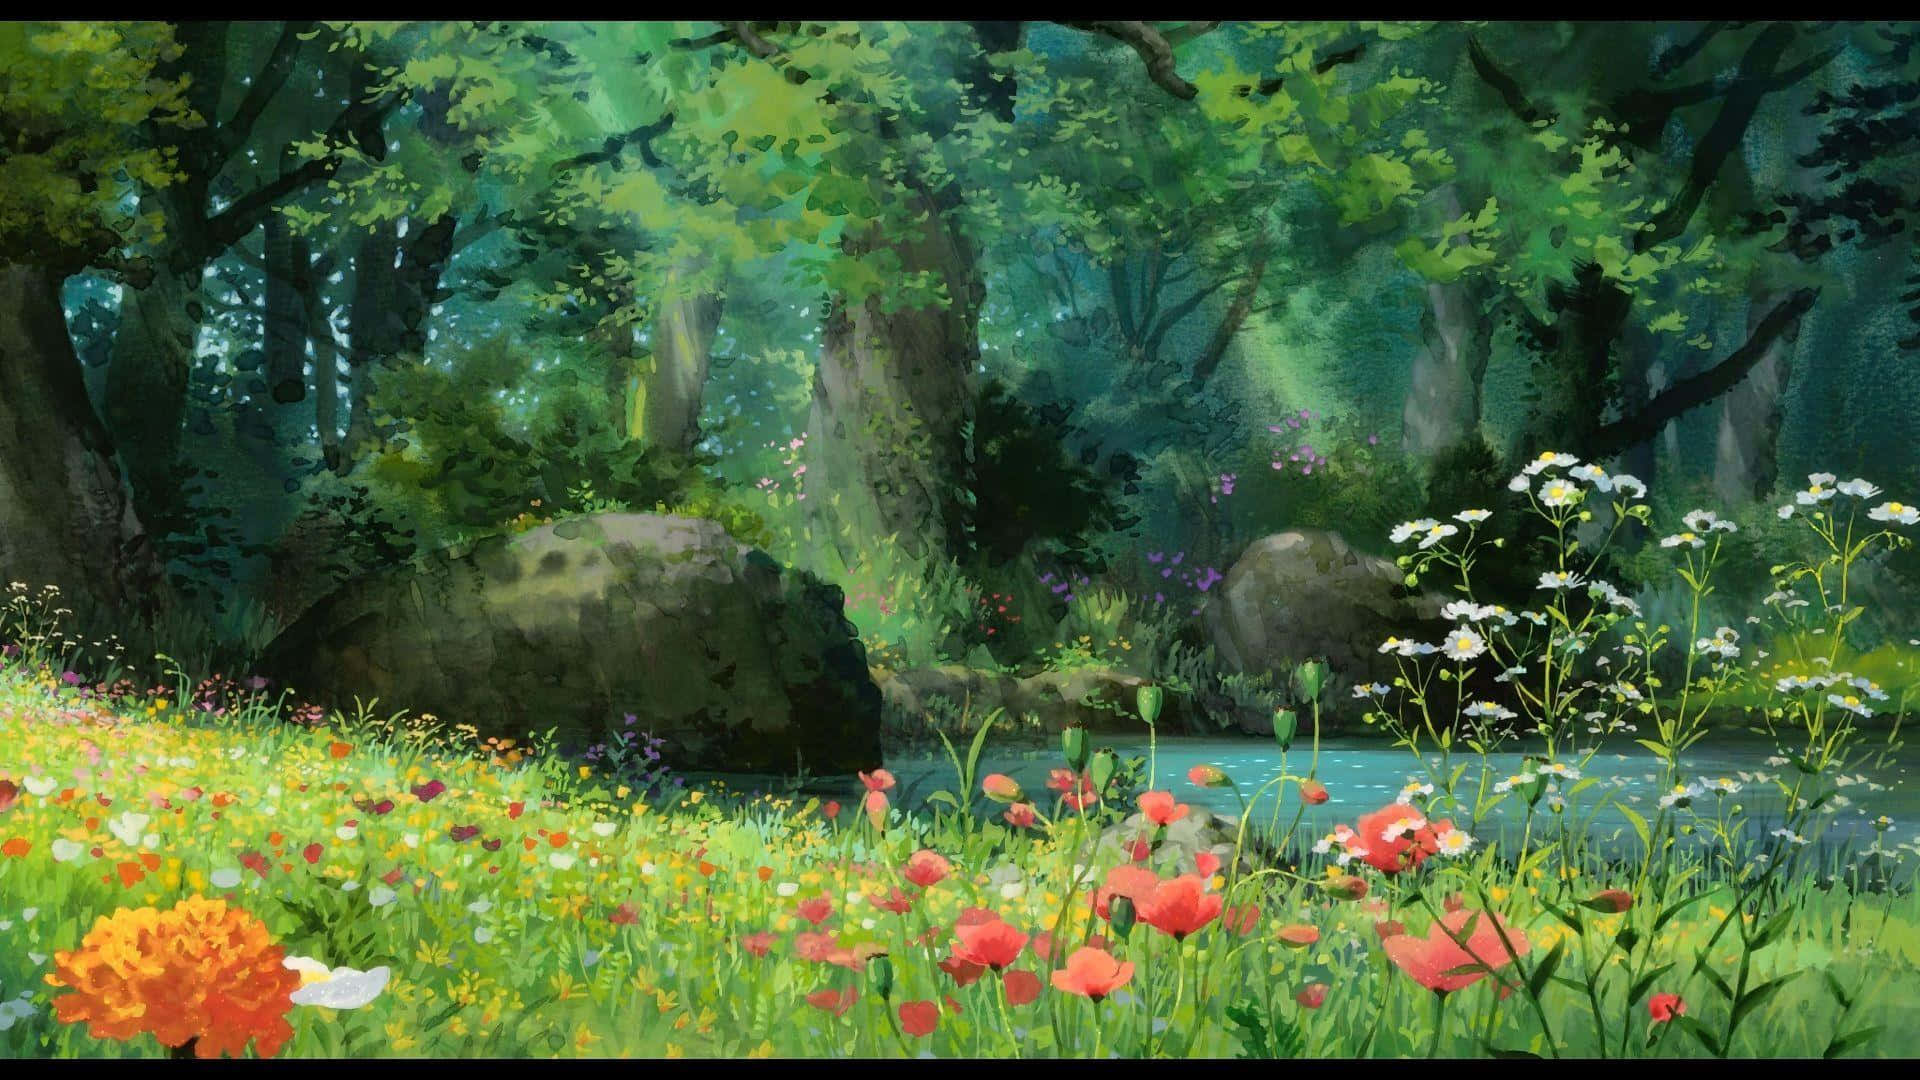 Explore the magical Anime Forest